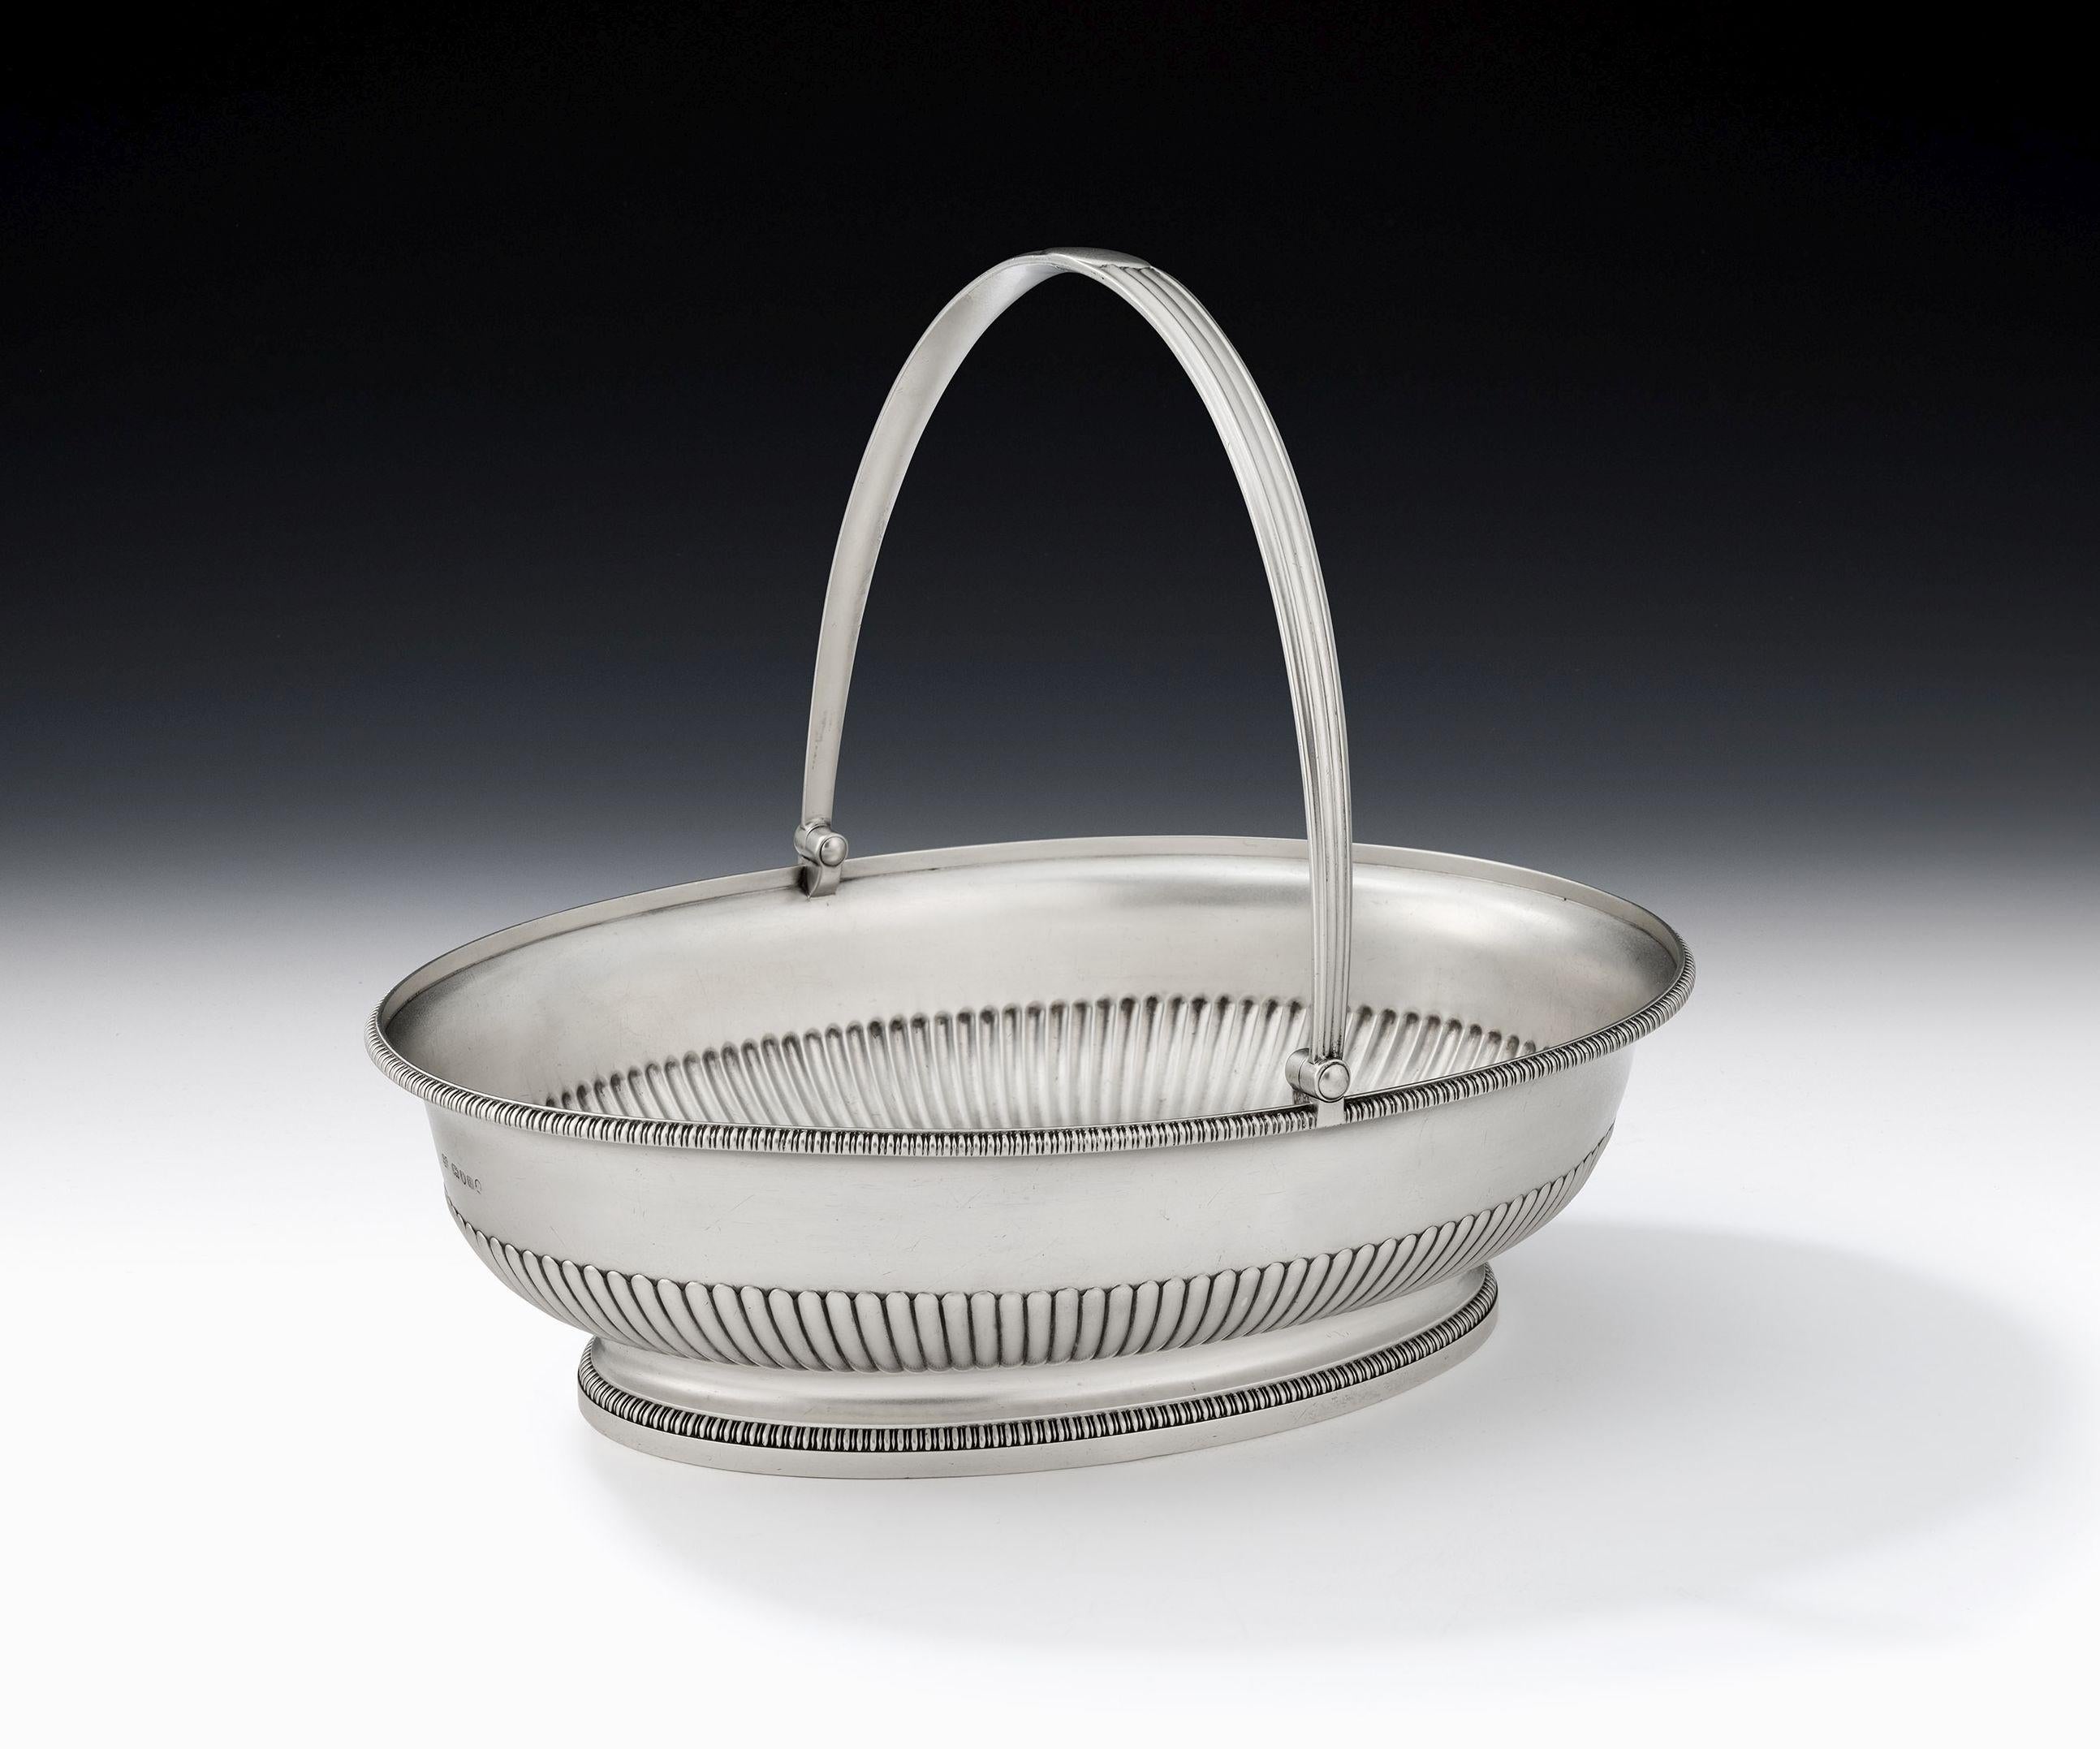 English George III Bread/Fruit Basket Made in London in 1803 by Richard Cooke